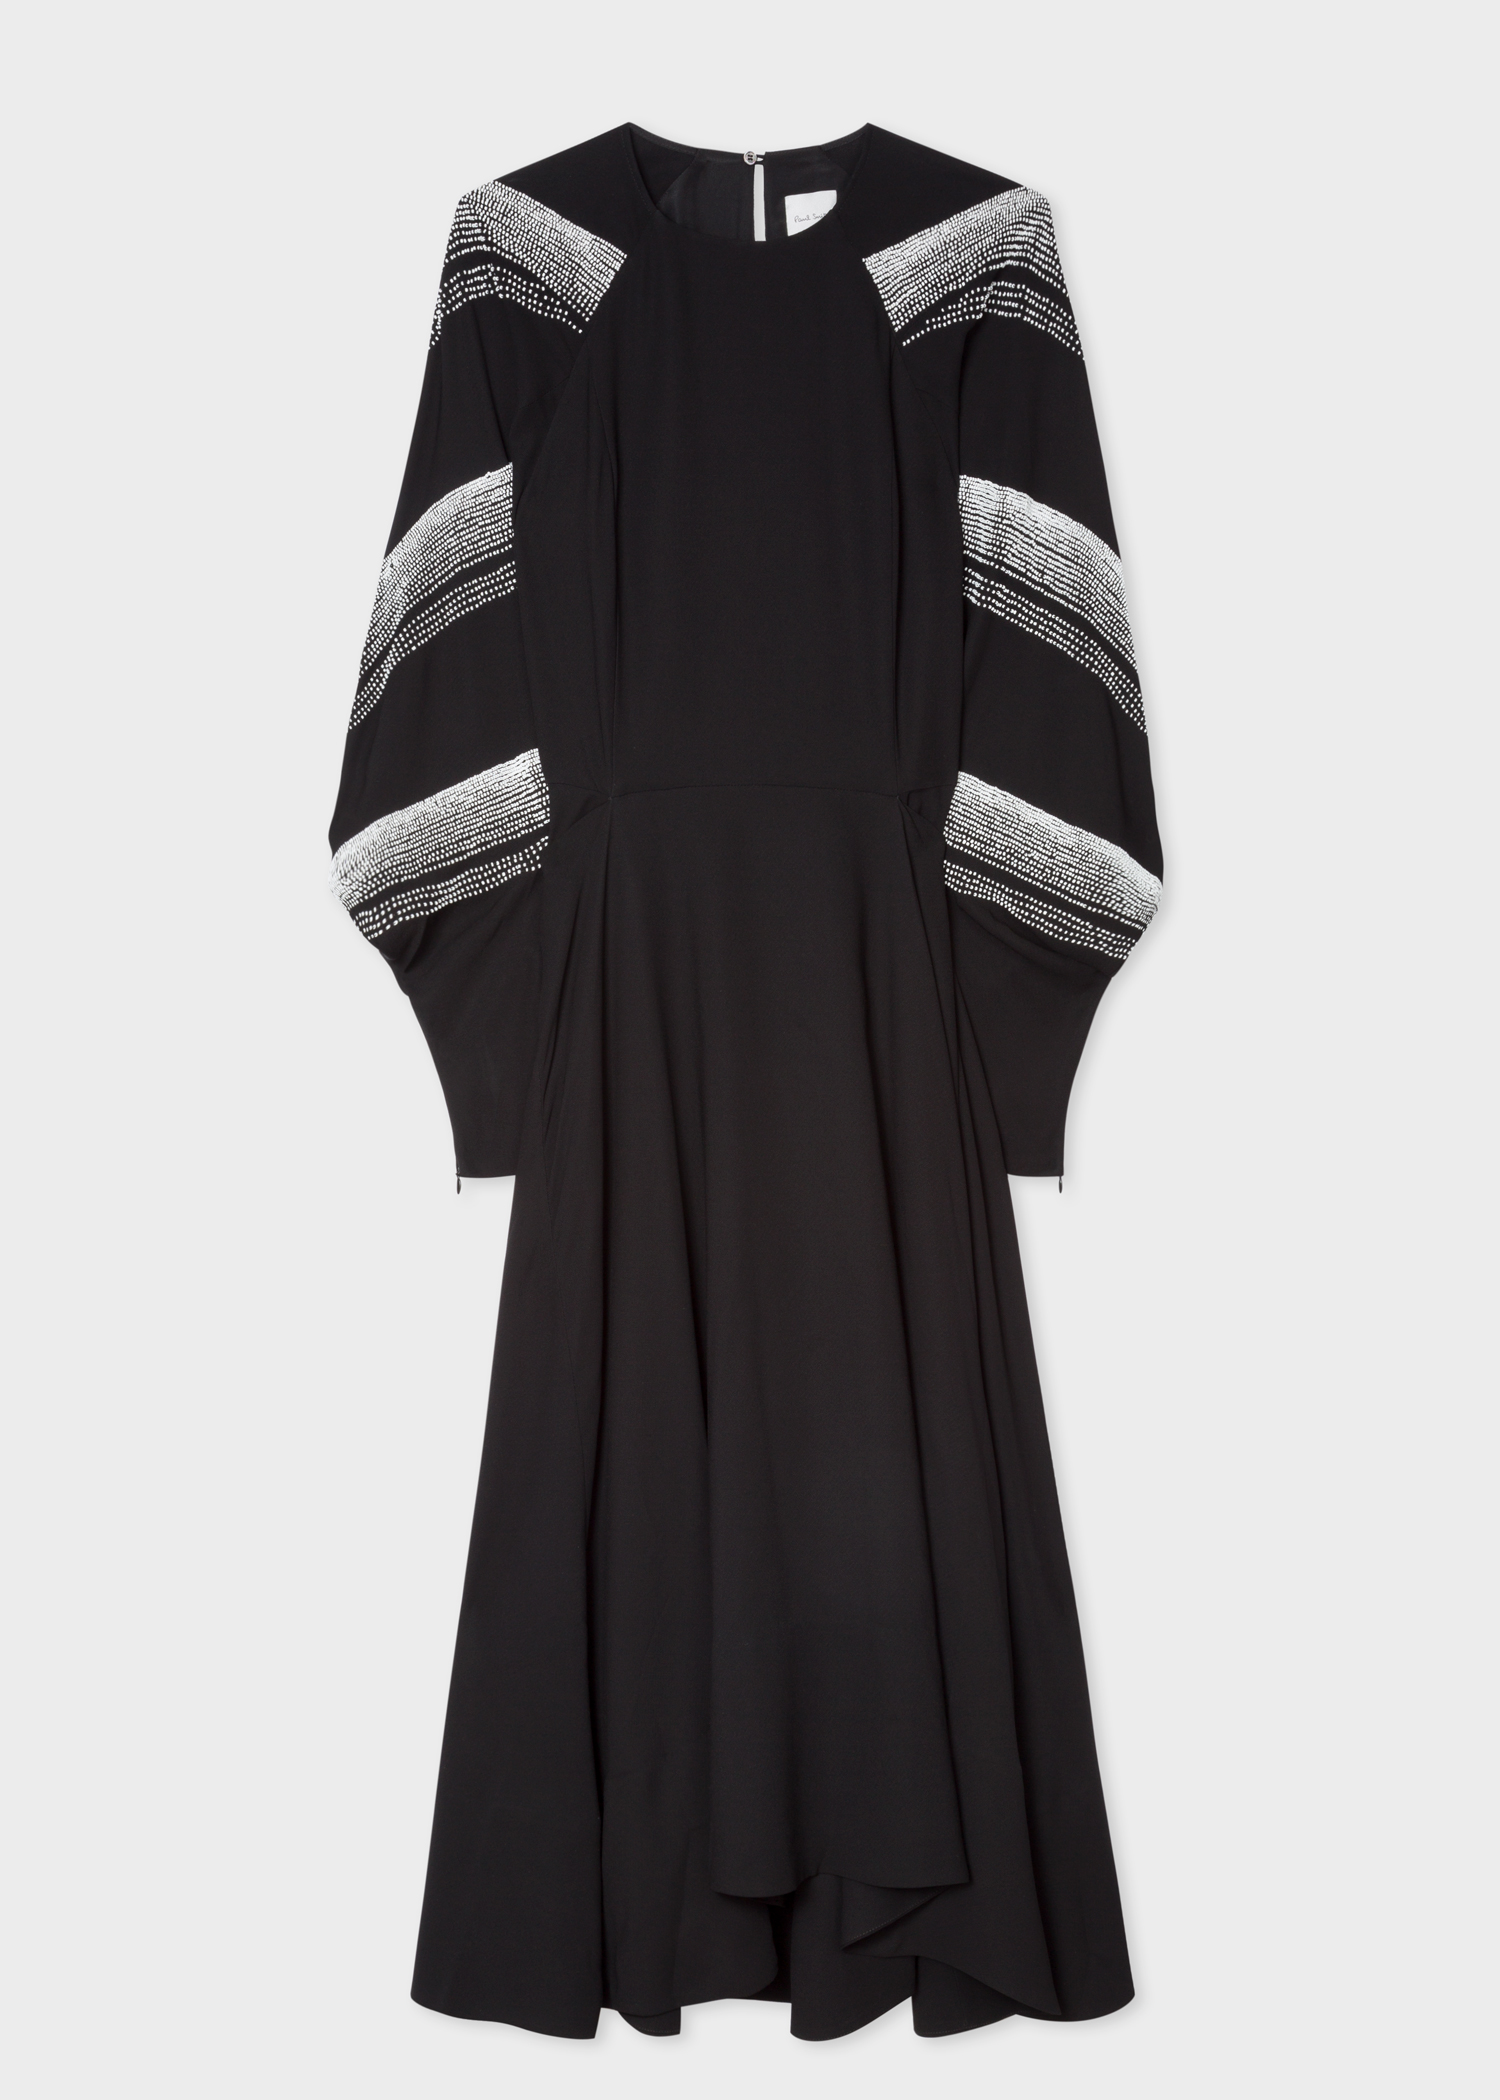 Front view - Women's Black Long-Sleeve Maxi Dress With Bugle Beaded Sleeves Paul Smith